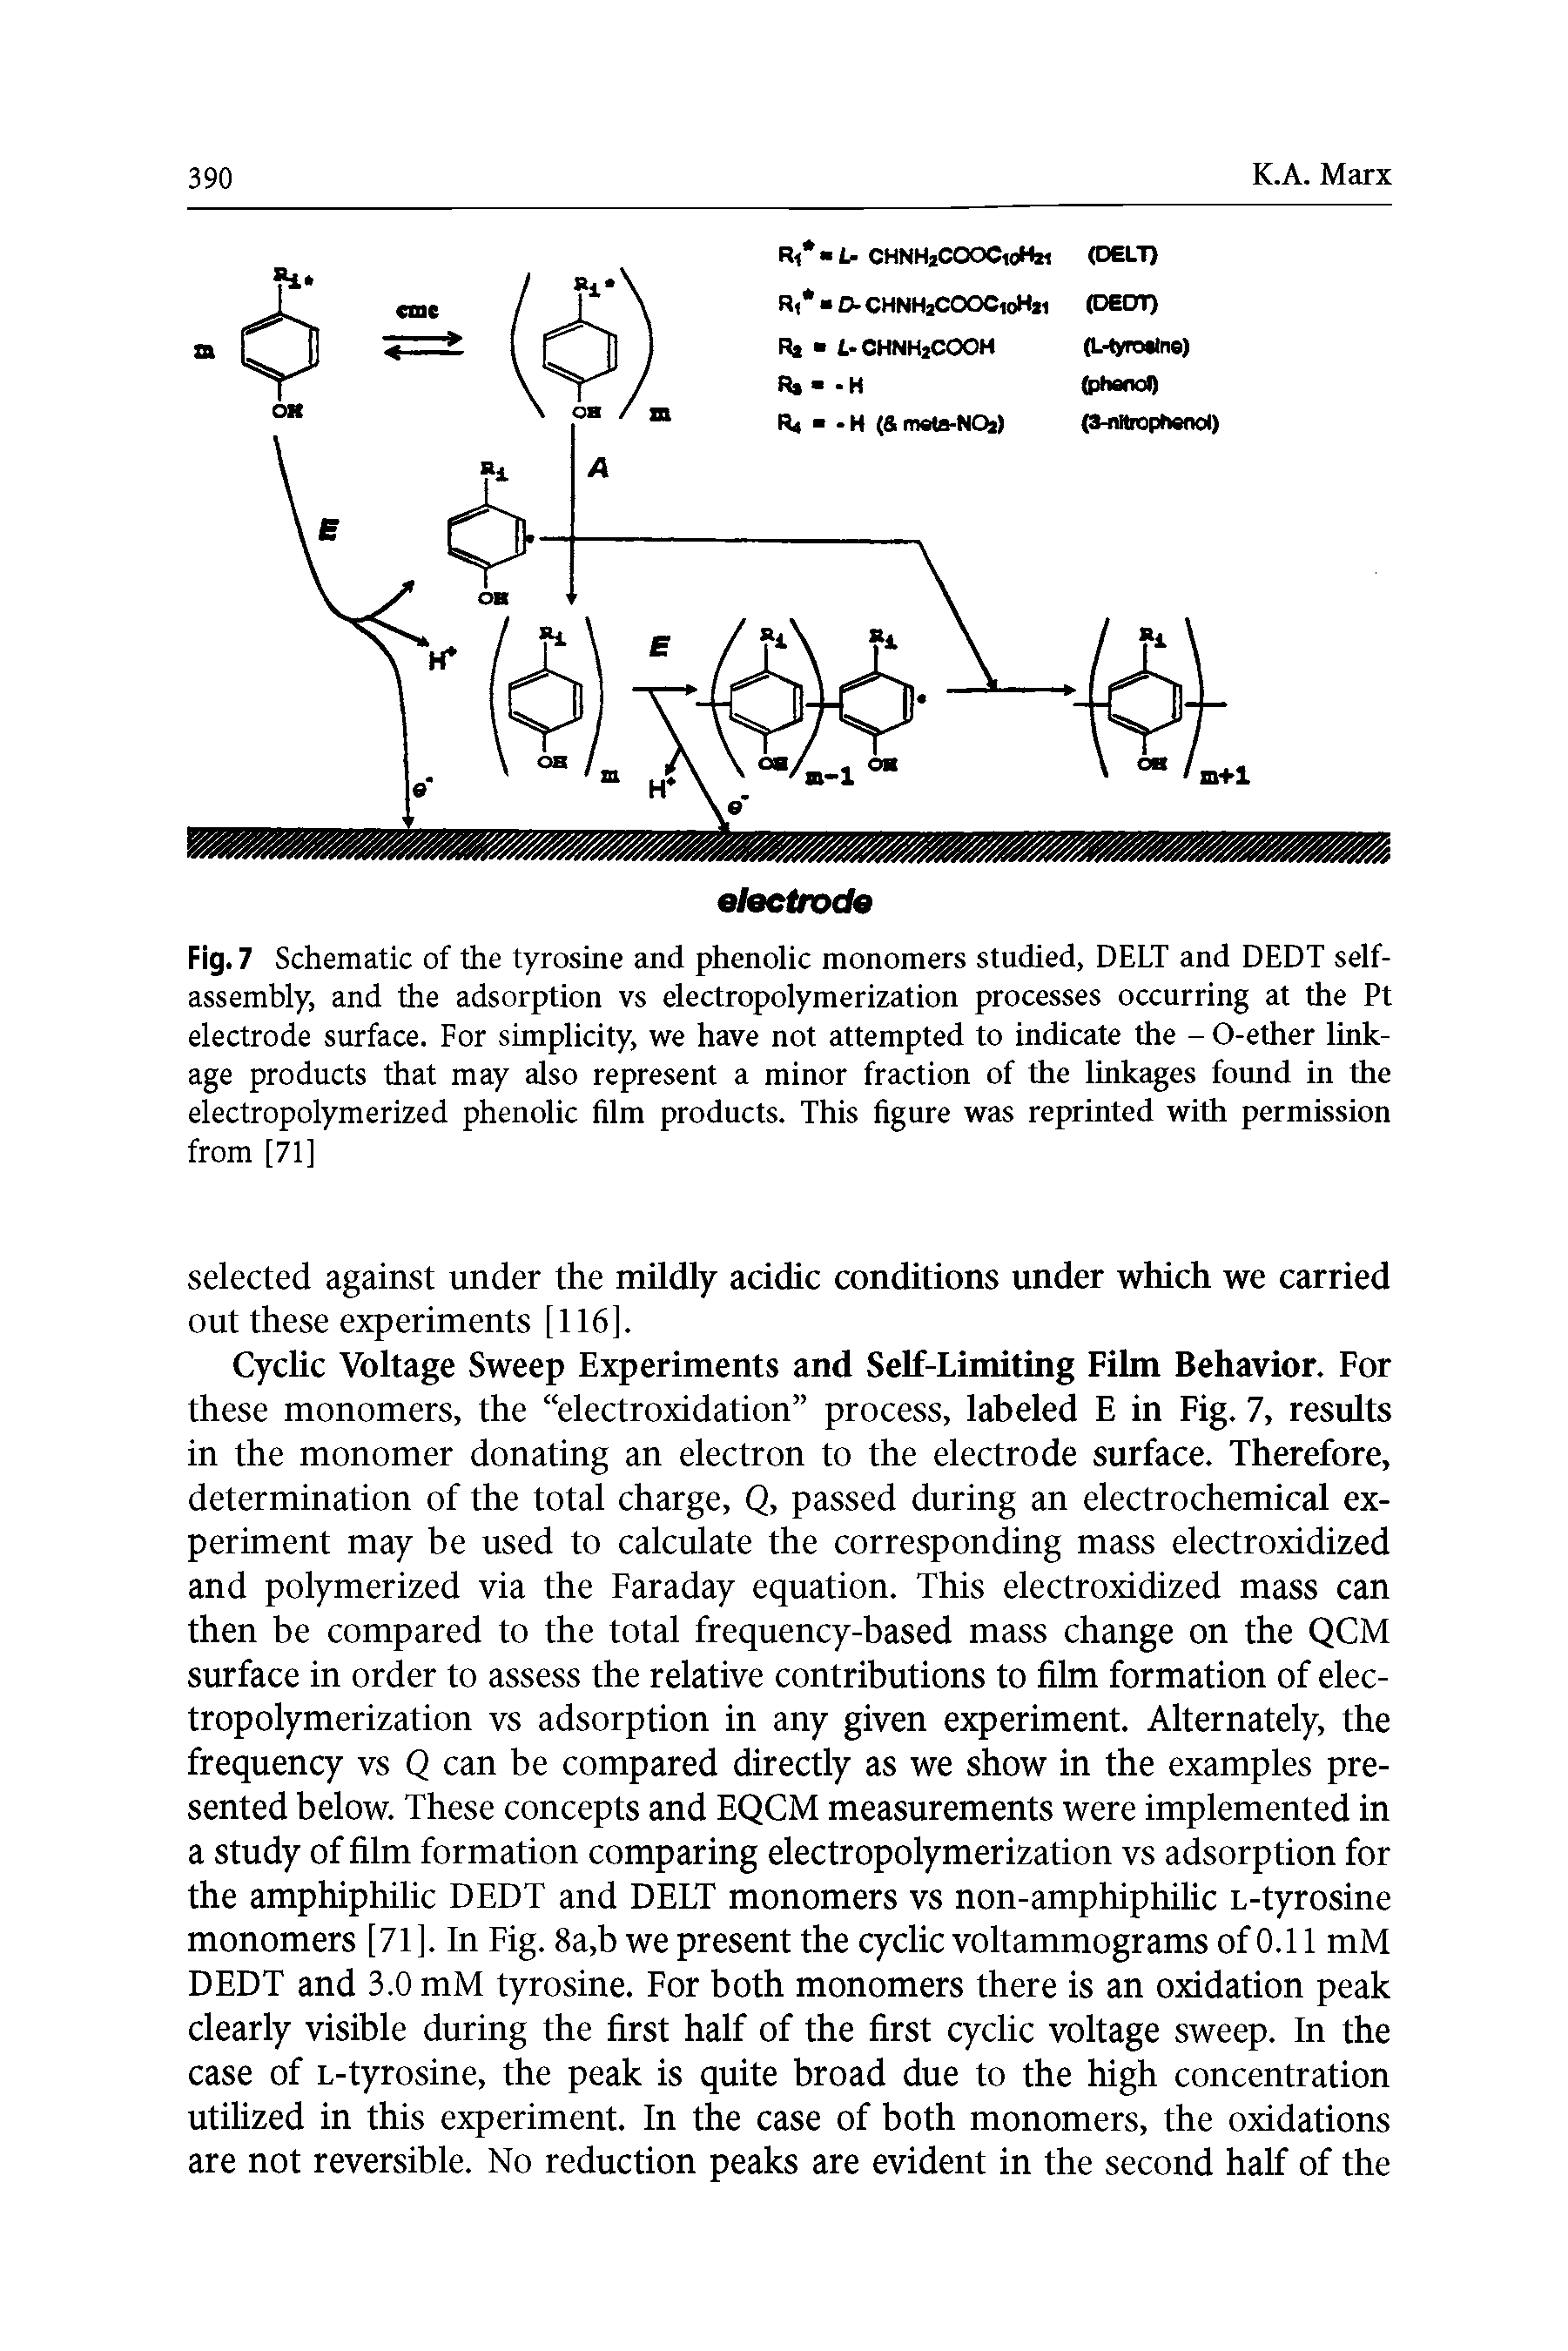 Fig. 7 Schematic of the tyrosine and phenolic monomers studied, DELT and DEDT self-assembly, and the adsorption vs electropolymerization processes occurring at the Pt electrode surface. For simplicity, we have not attempted to indicate the - 0-ether linkage products that may also represent a minor fraction of the linkages foimd in the electropolymerized phenolic film products. This figure was reprinted with permission from [71]...